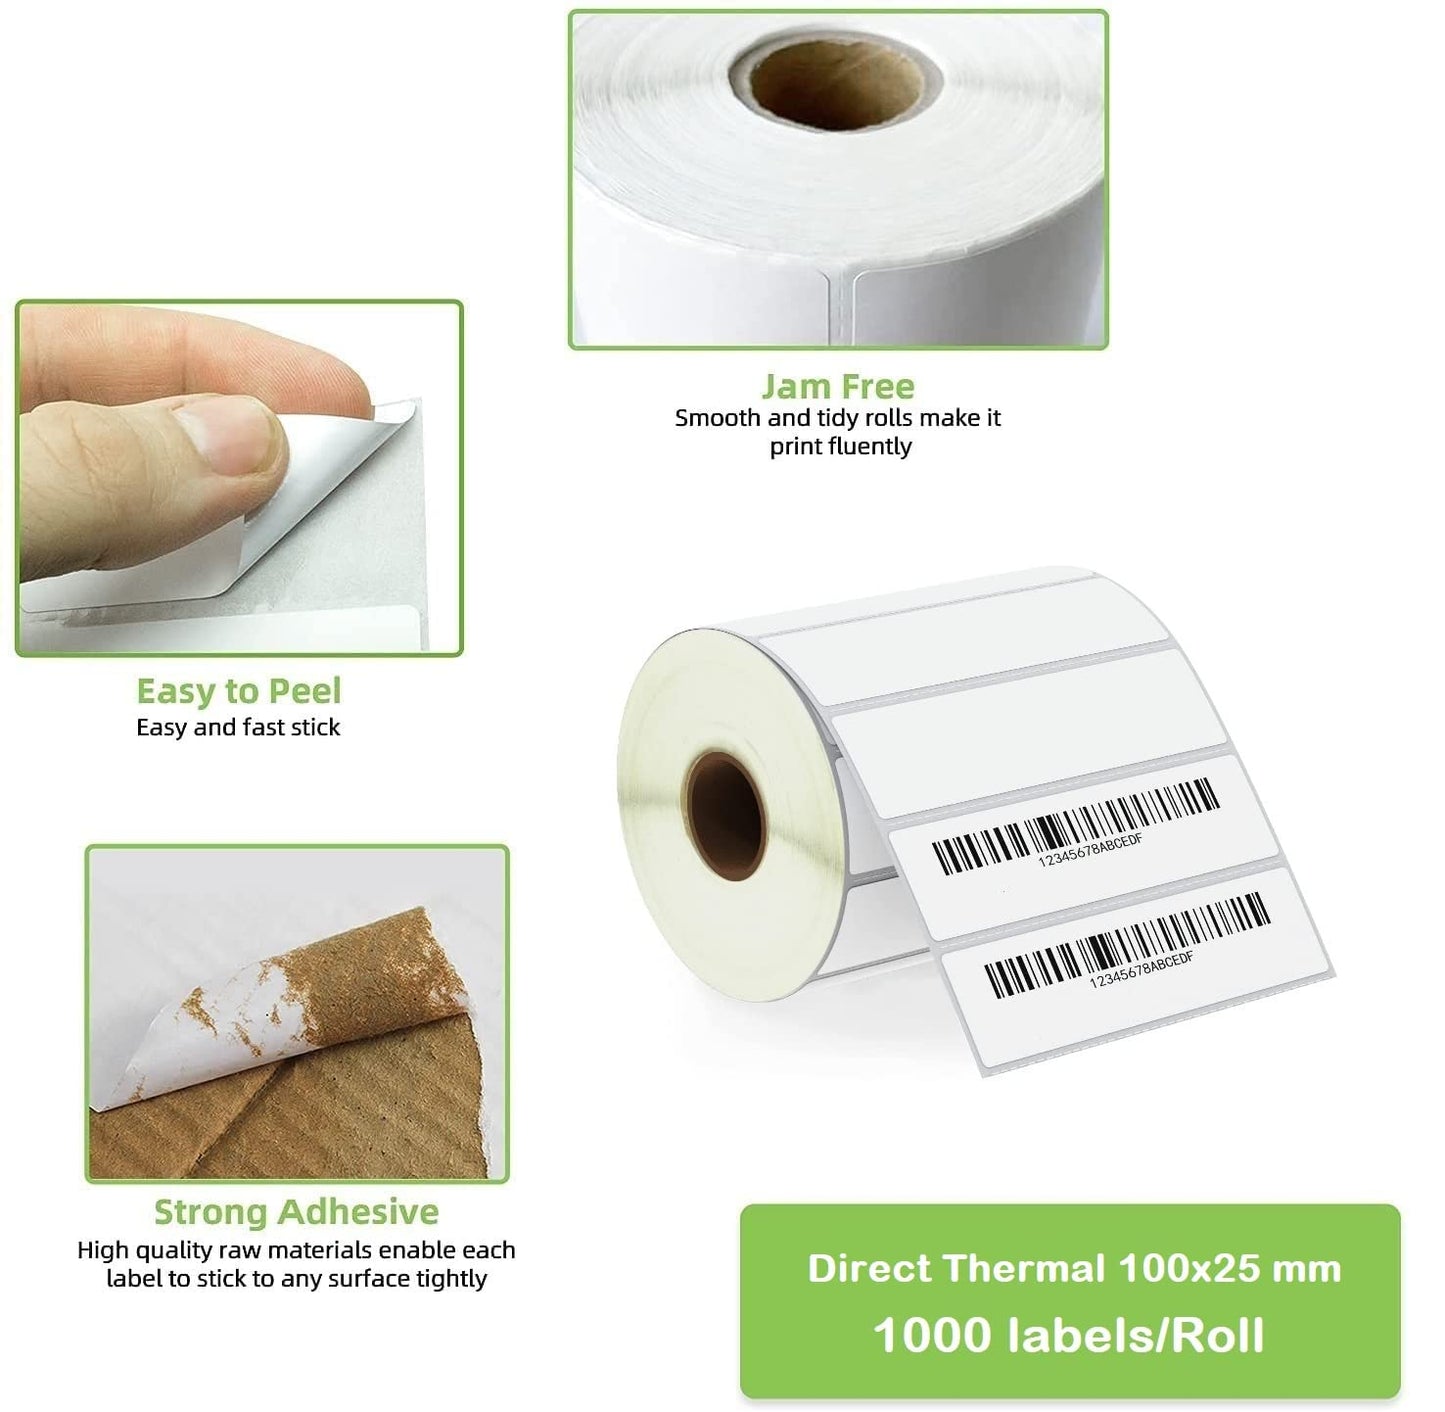 KIYA 38x25x2 Barcode Label Sticker  - 38mm x 25mm - 1 Ups - 2000 Labels Per Roll - White Self Adhesive Sticker for Printing Barcoding (1 Roll Per Pack (2000 Labels))